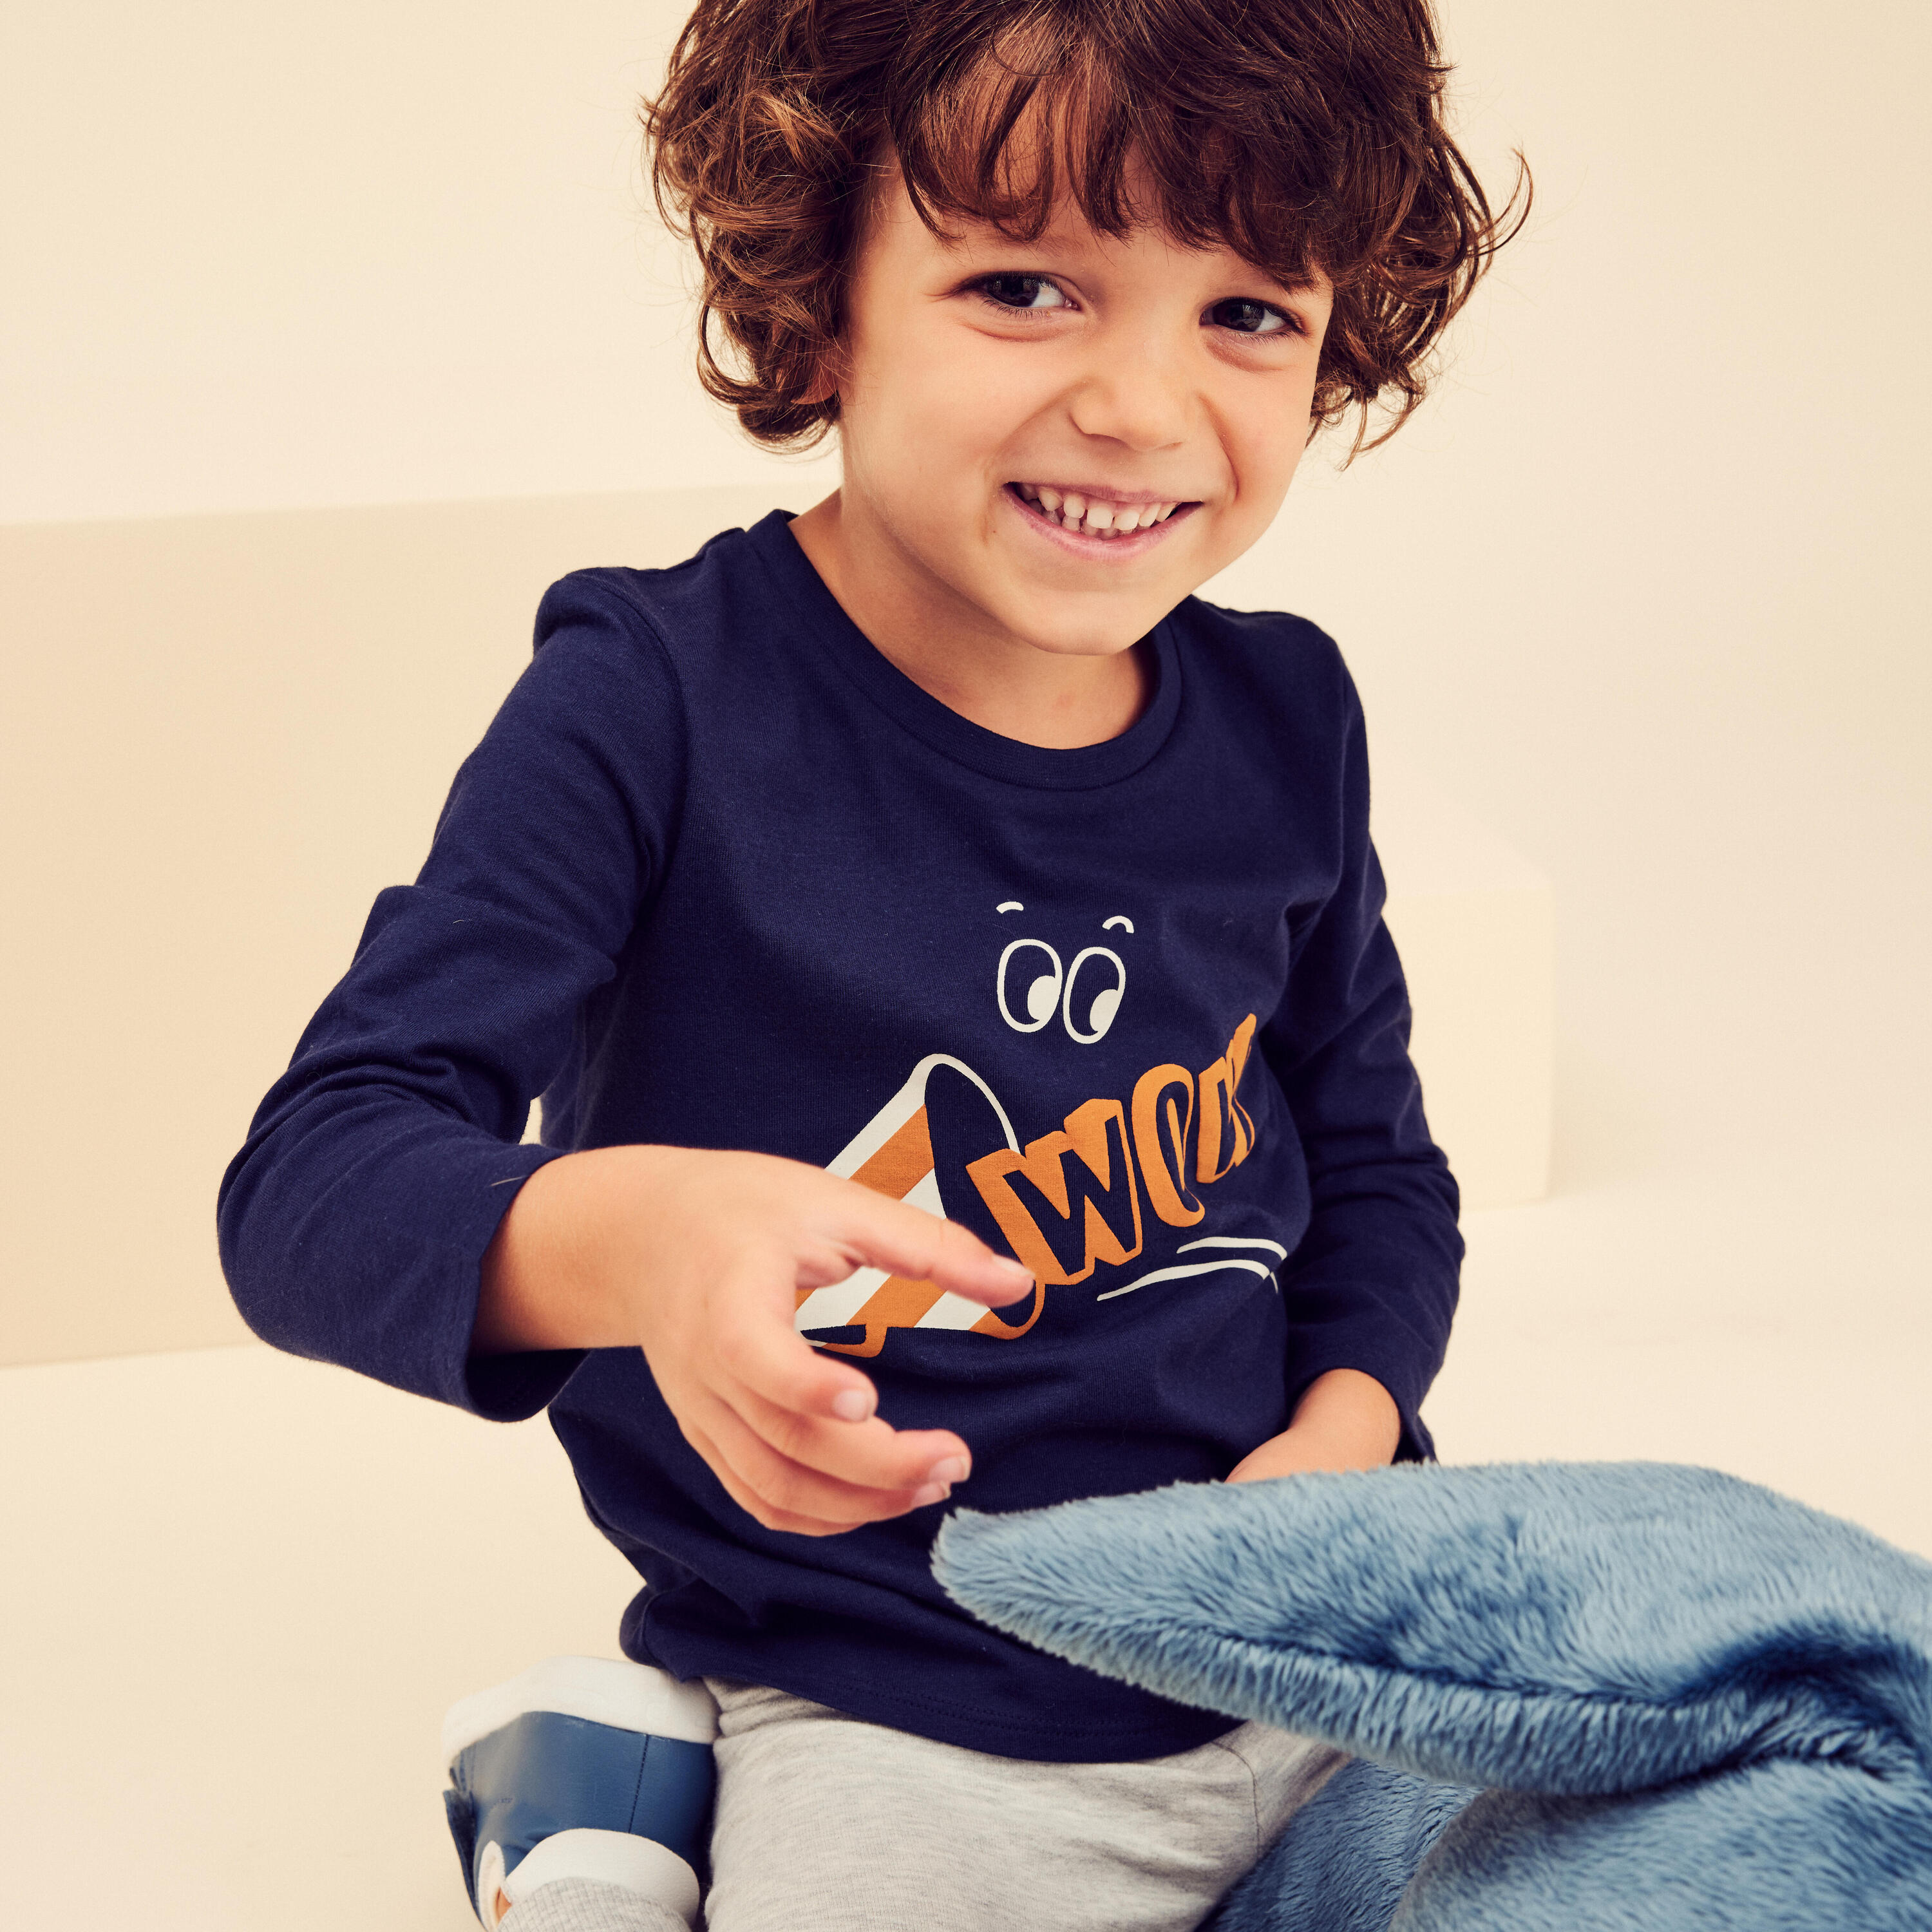 Kids' Long-Sleeved Cotton T-Shirt Basic - Navy Blue with Pattern 2/6